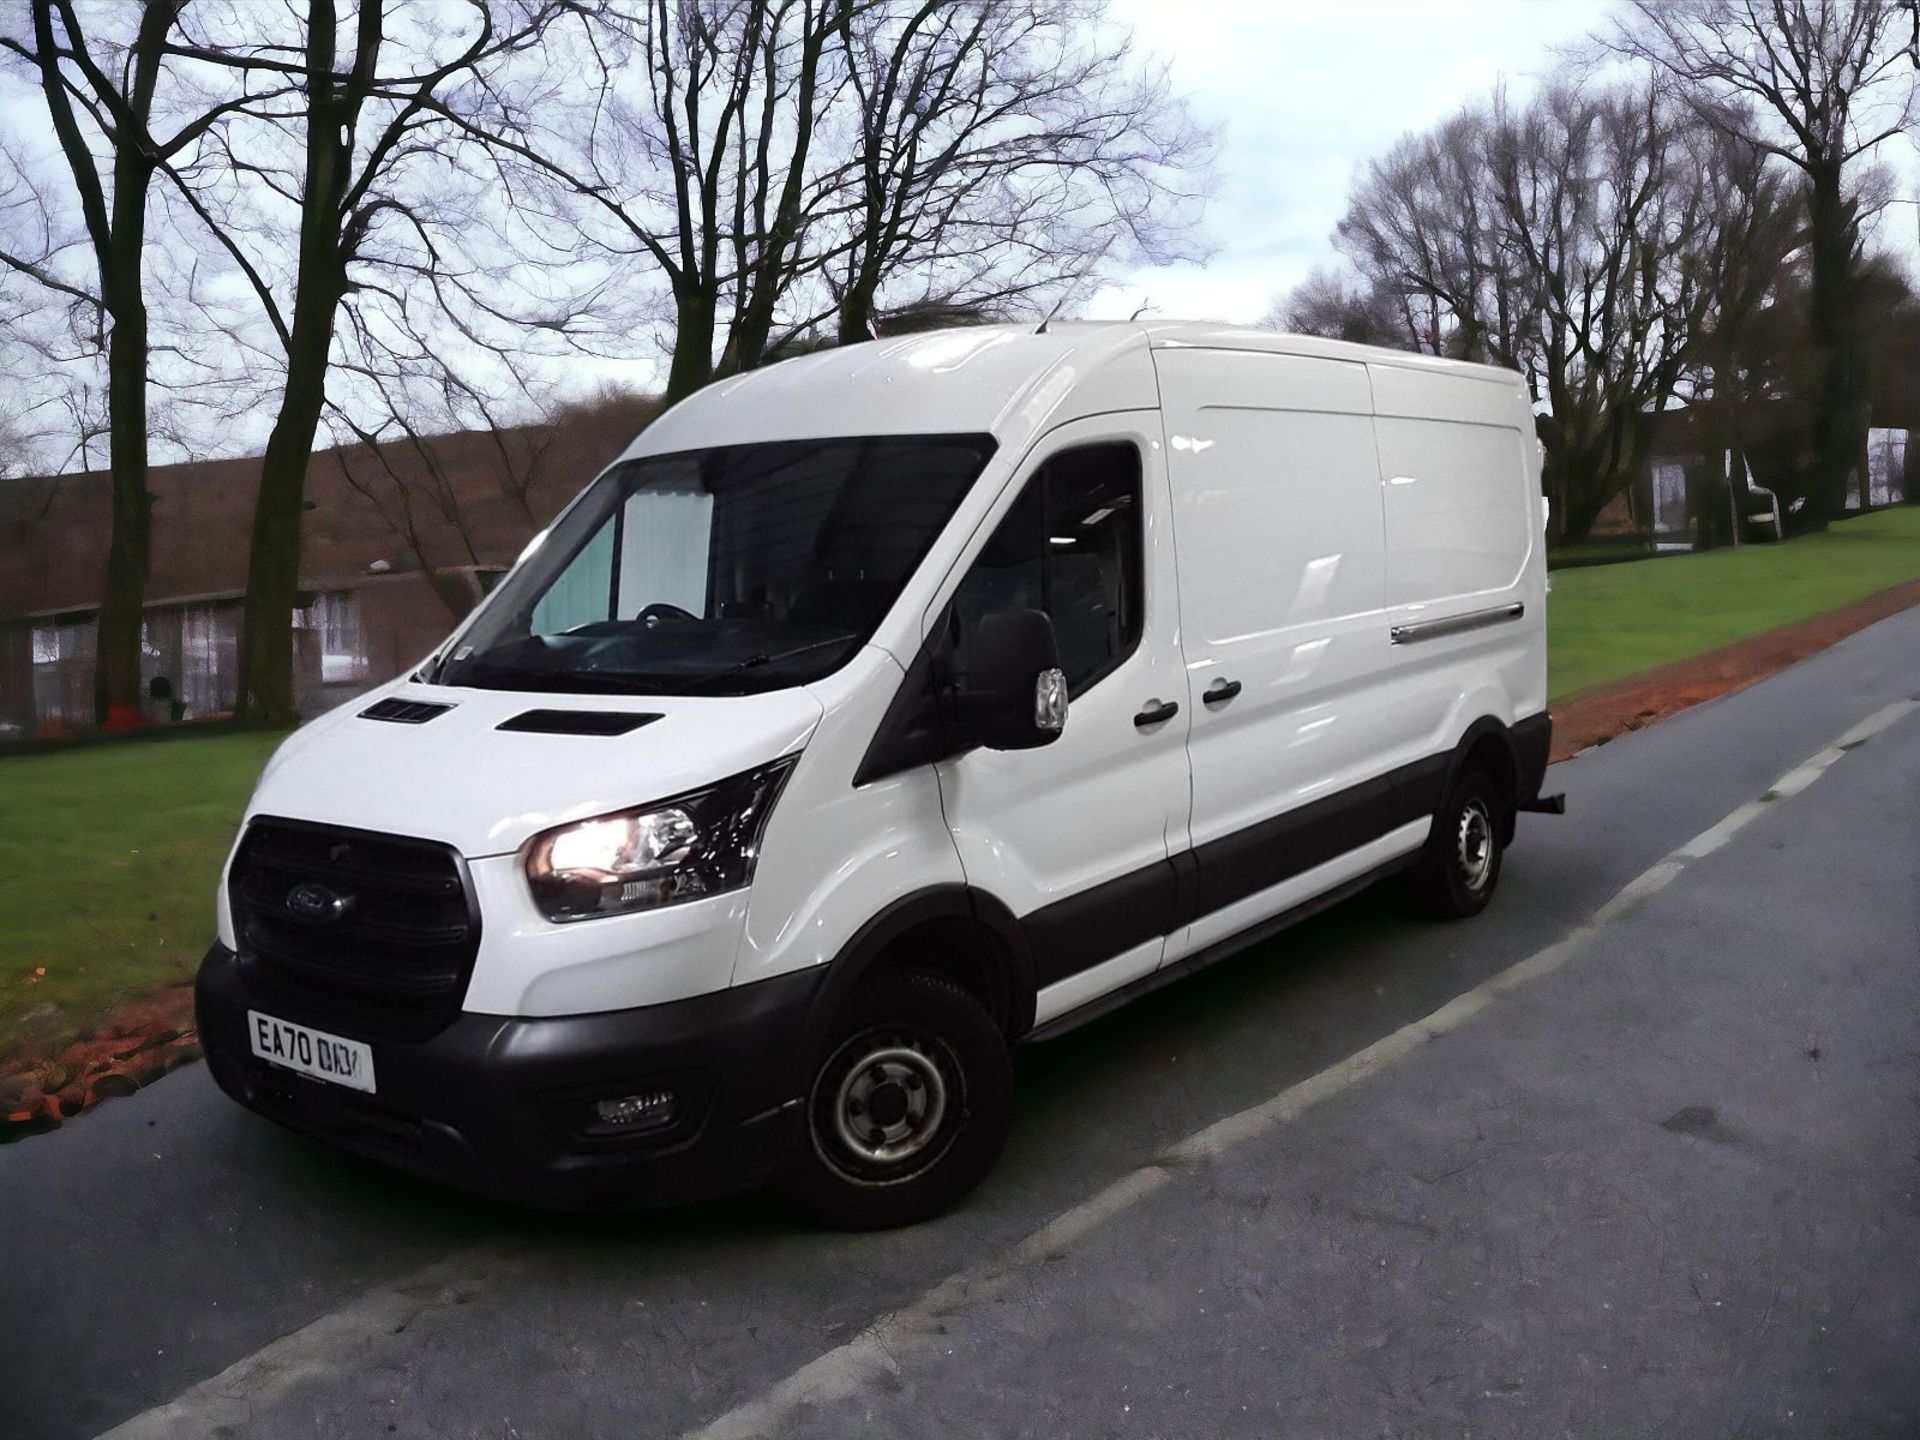 2020 FORD TRANSIT LWB L3H2 LEADER - RELIABLE AND WELL-EQUIPPED - Image 4 of 12